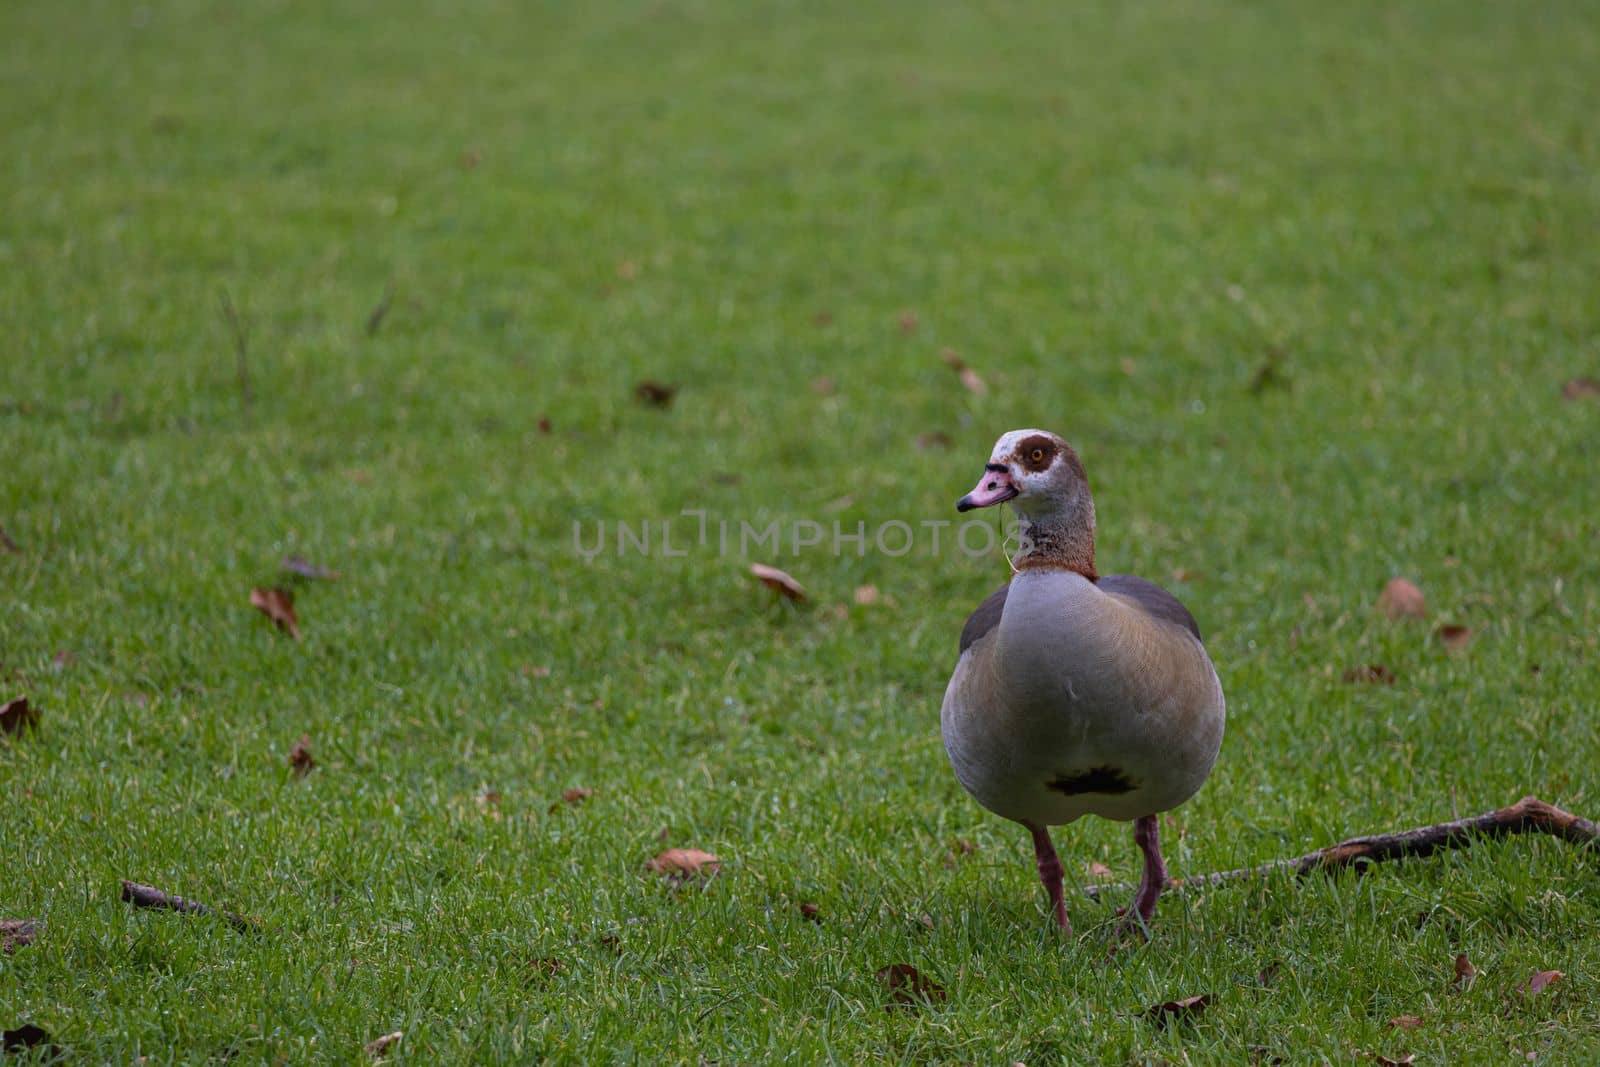 Portrait of Beautiful nile goose. Beautiful Egyptian goose on meadow. Goose standing on the grass